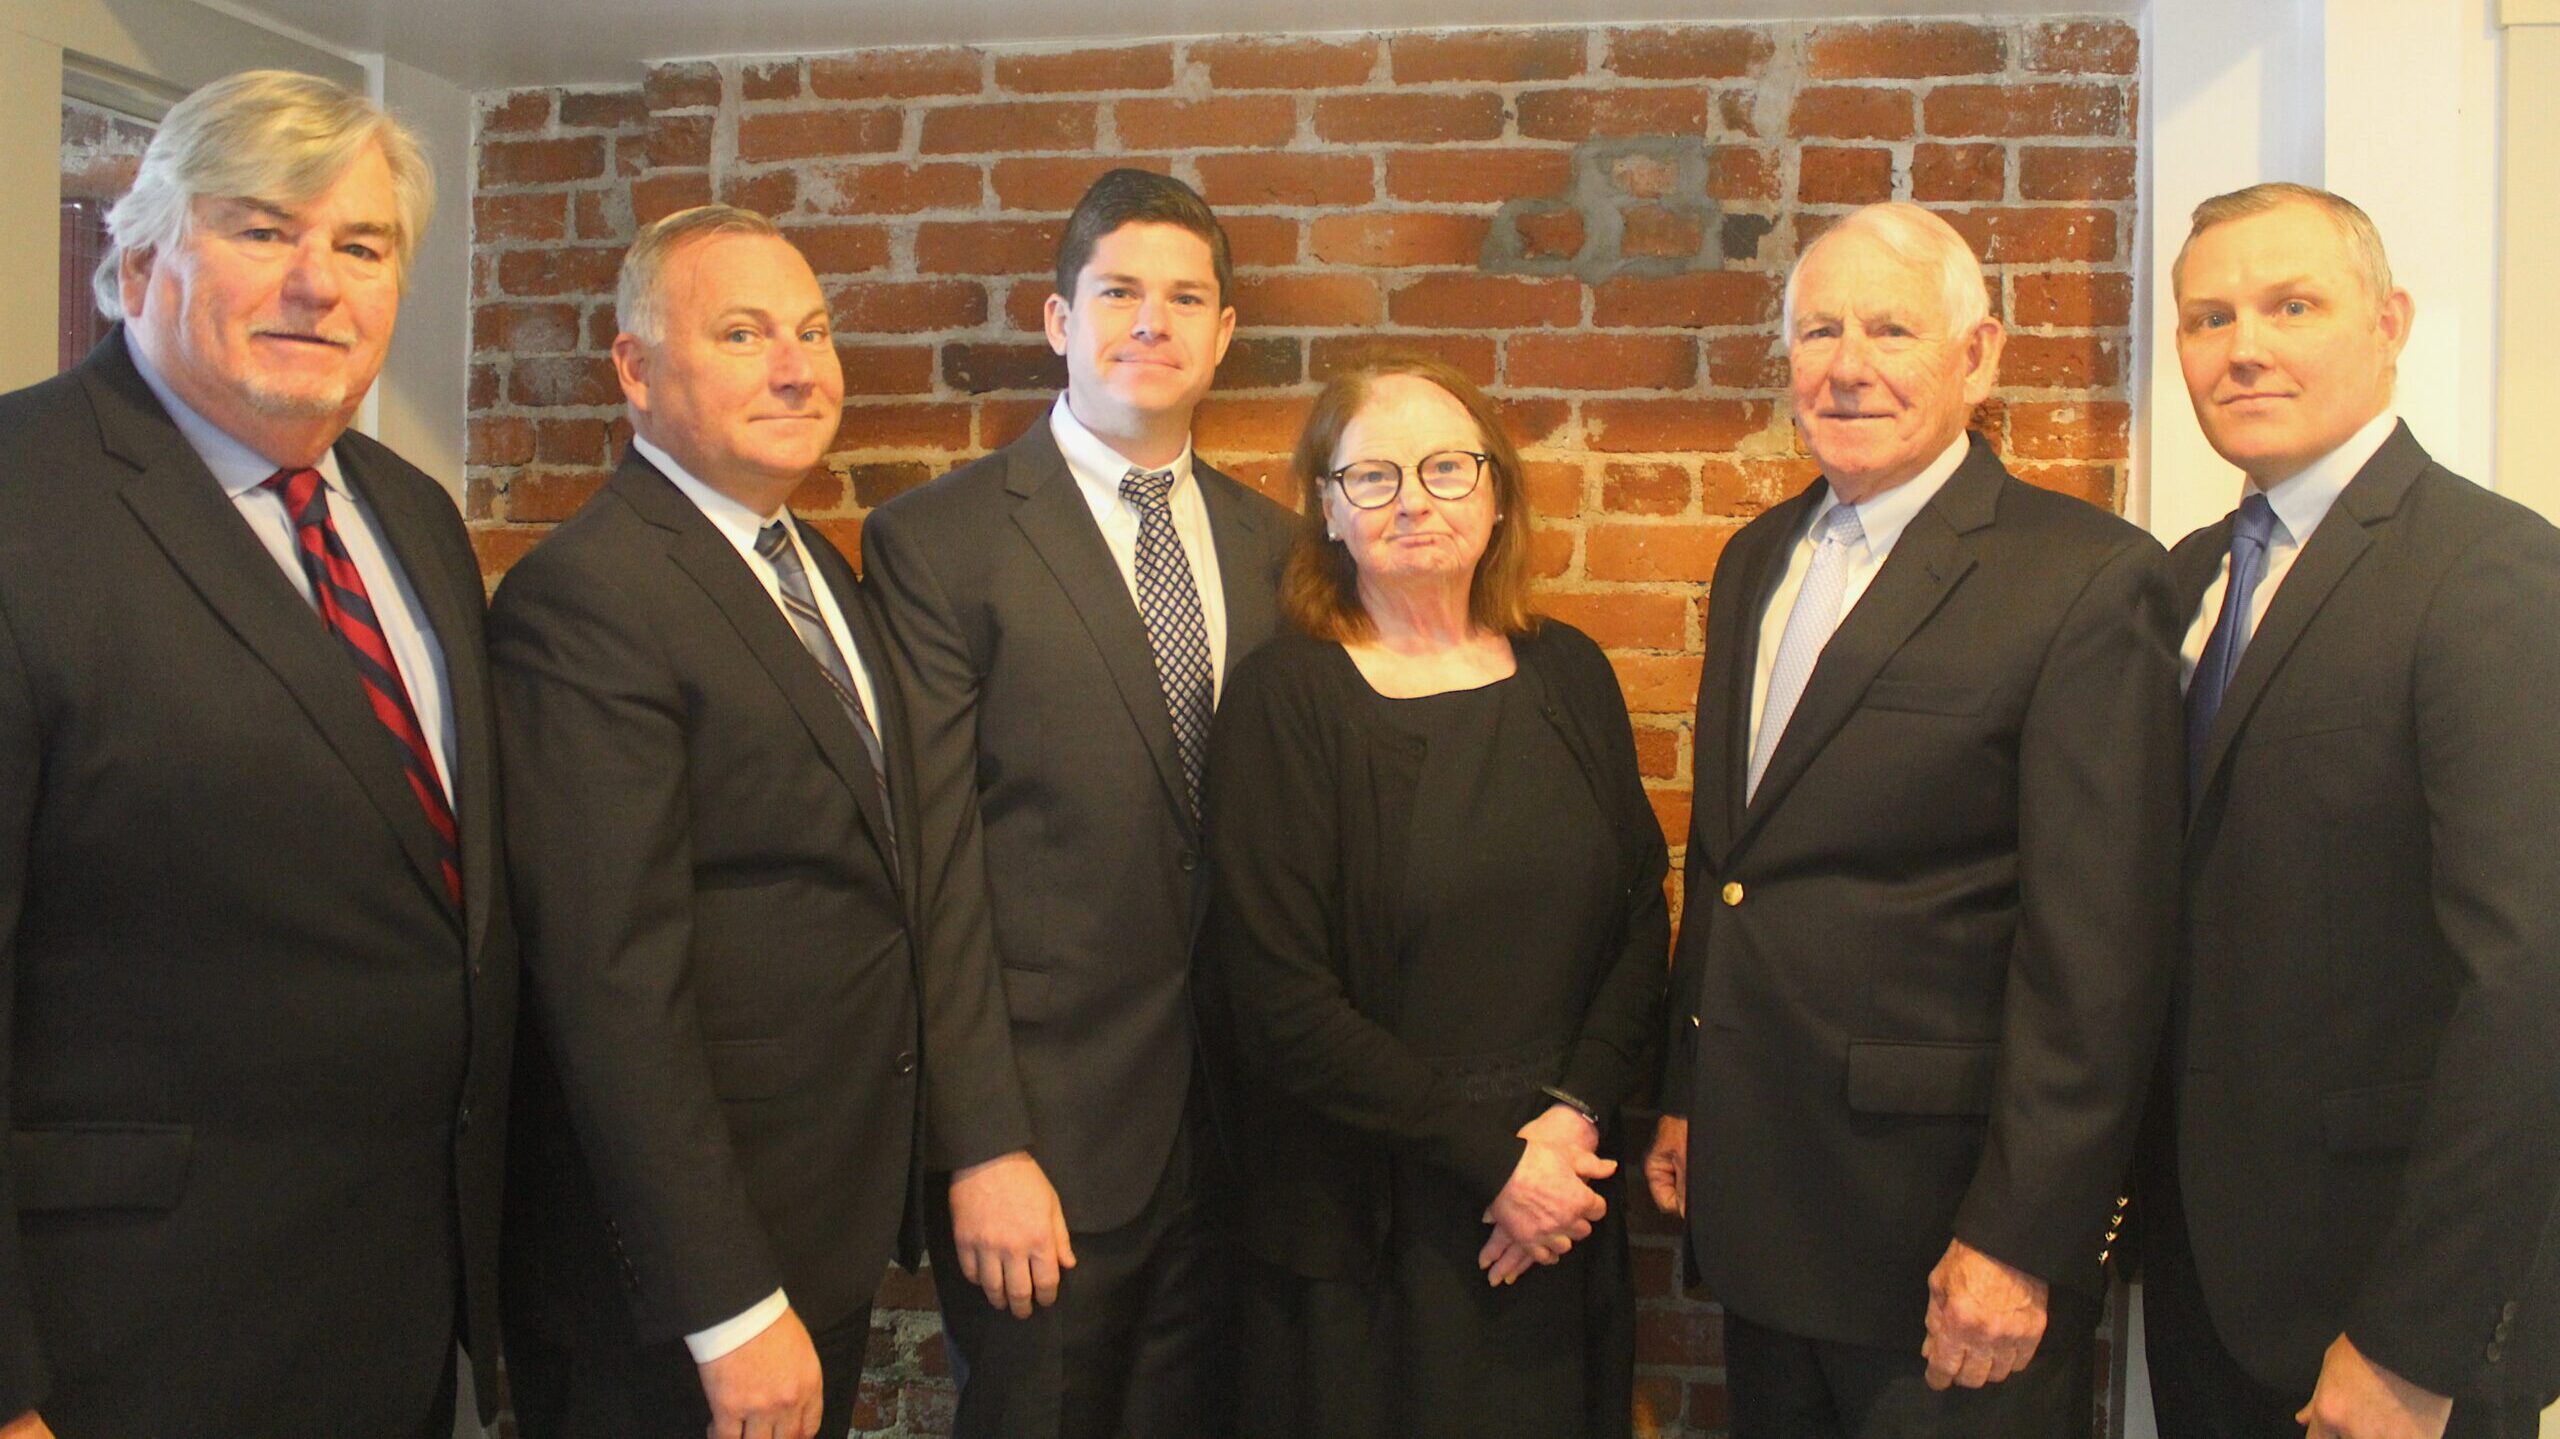 Business Profile: Law firm Nealon, Nealon & Click adds partner, moves to Main Street